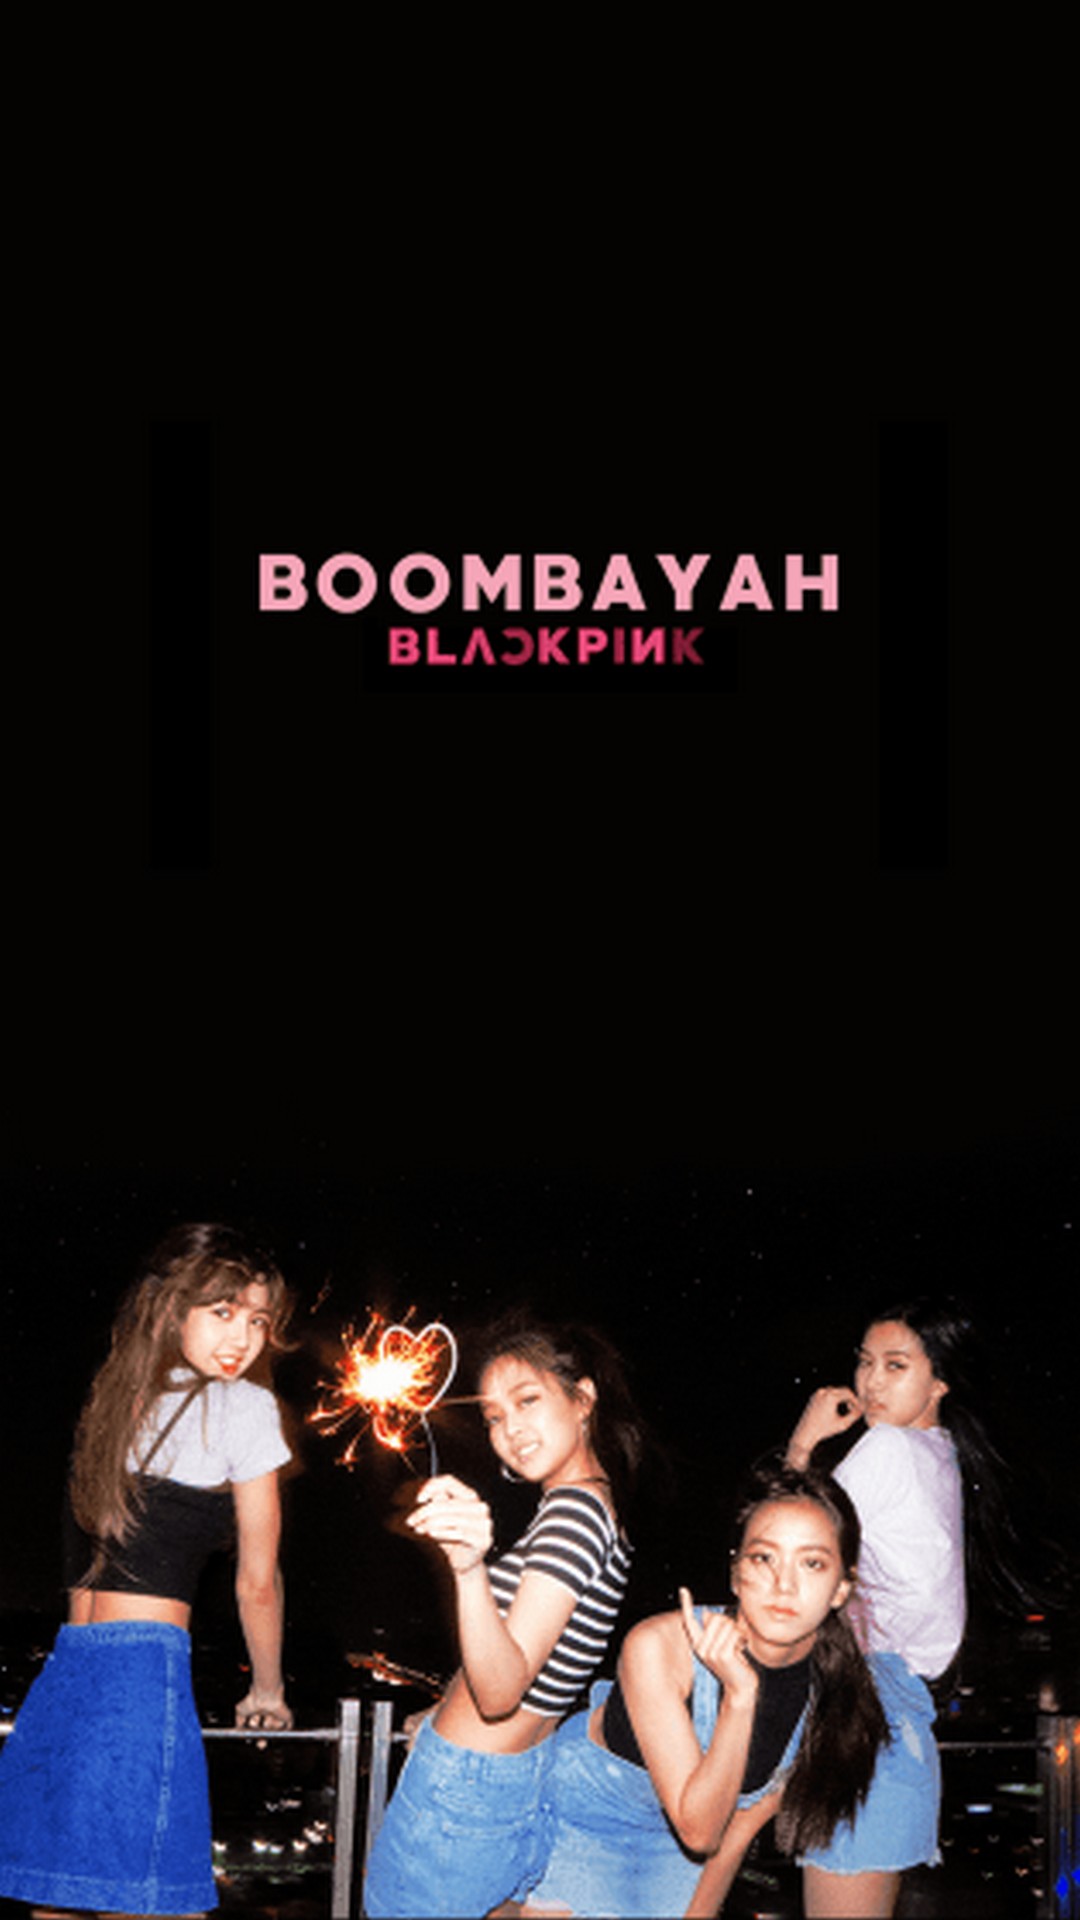 Blackpink i Phones Wallpaper With high-resolution 1080X1920 pixel. Download all Mobile Wallpapers and Use them as wallpapers for your iPhone, Tablet, iPad, Android and other mobile devices